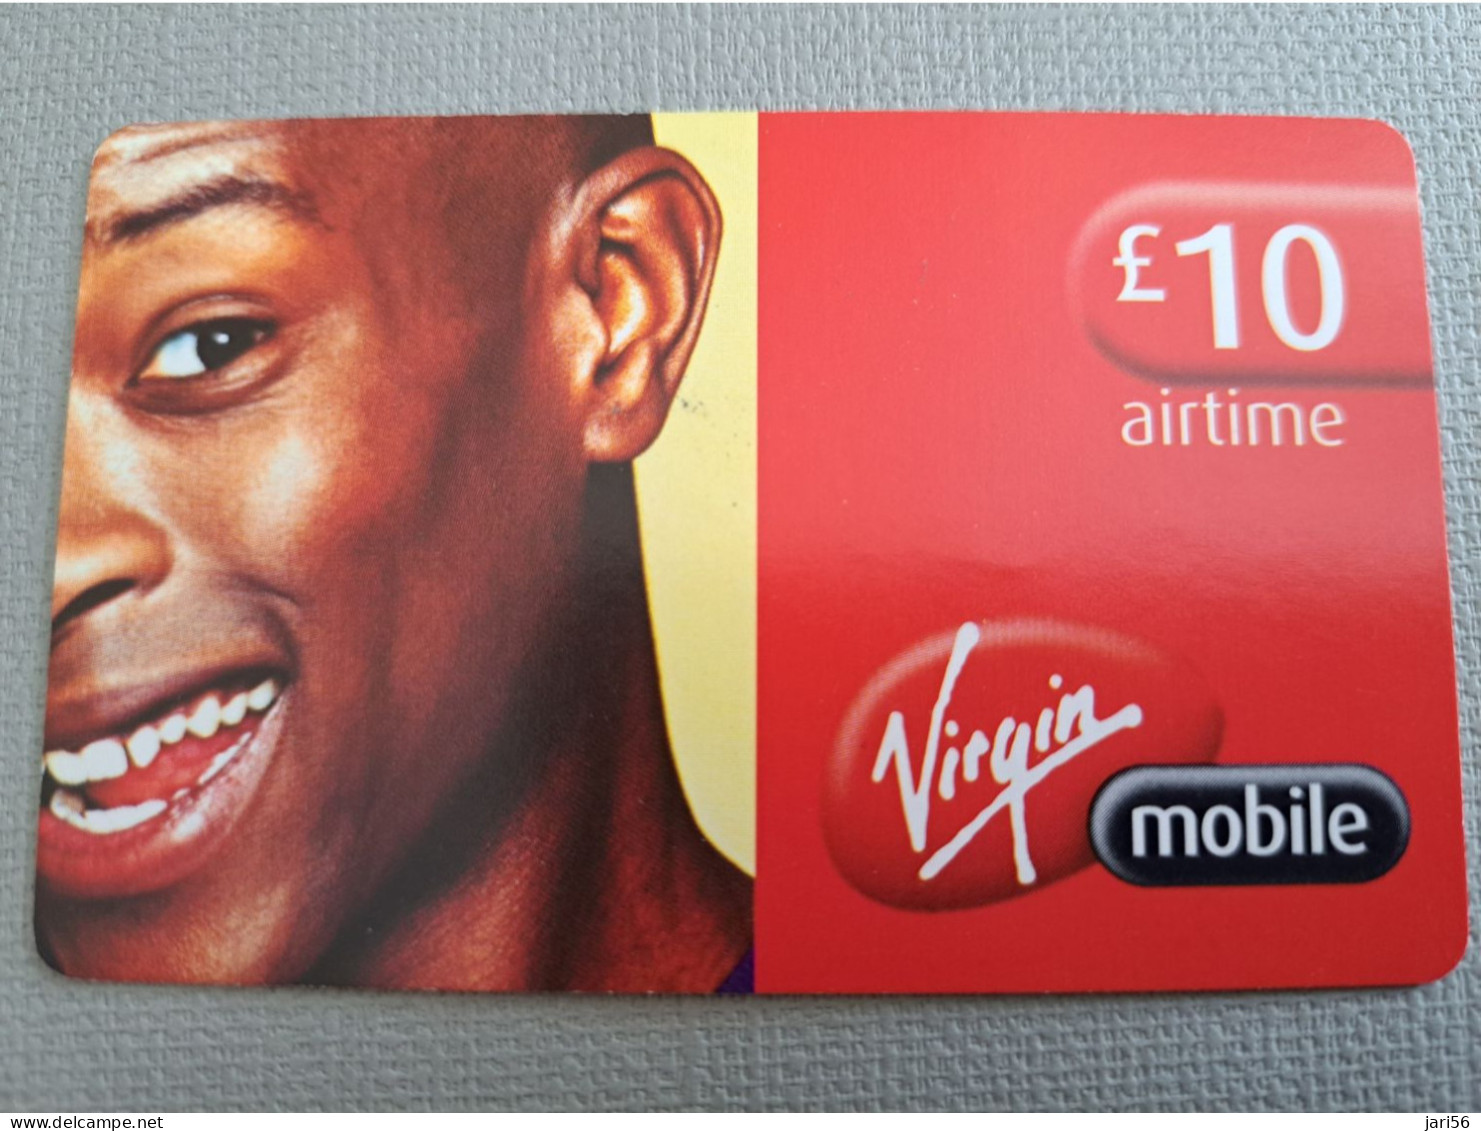 GREAT BRITAIN / 10 POUND  /PREPAID / VIRGIN MOBILE //FACE  PEOPLE ON CARD / FINE USED    **15066** - Collections